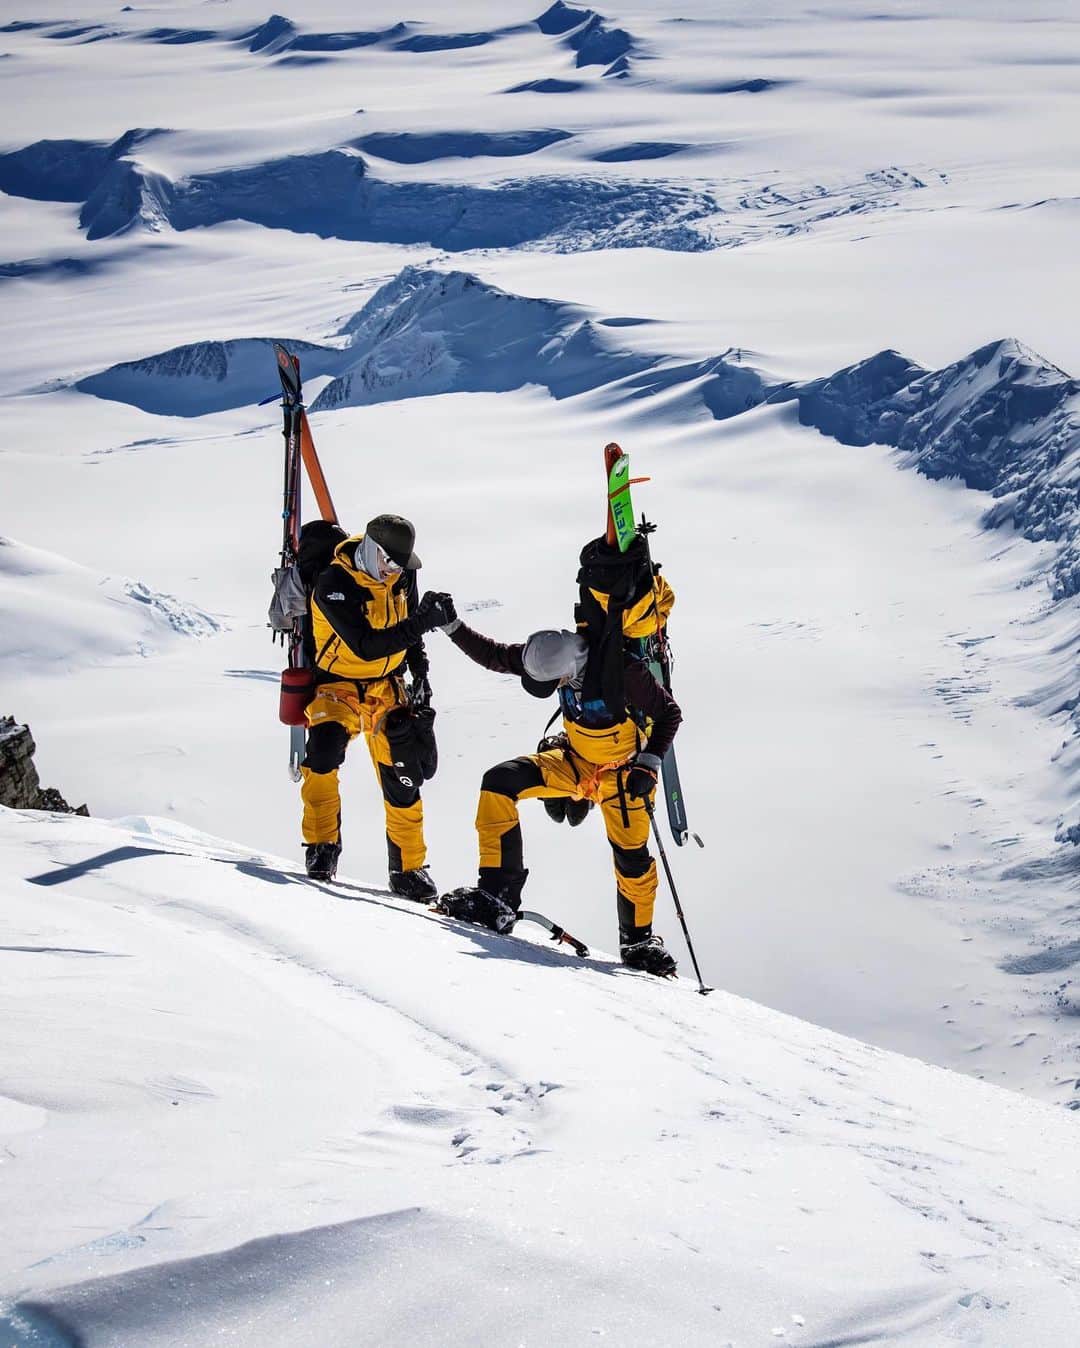 ジミー・チンさんのインスタグラム写真 - (ジミー・チンInstagram)「In January, @hilareenelson @jimwmorrison @conrad_anker and I set out to Antarctica to climb and ski the two hightest peaks on the continent - Mount Vinson and Mount Tyree. On Vinson, we hoped to climb and ski the Ice Stream first climbed by @conrad_anker 20 years ago. The line had never been repeated. We hoped to make the 2nd ascent and 1st ski descent of the route. ⁣ ⁣ Image 1 & 2⁣ After landing at Vinson BC, we immediately shuttled our climbing loads to the base of the route and checked conditions. The next morning we set out to climb the mountain without much time for acclimatization. As in zero time to acclimatize. Weather windows in Antarctica are coveted and often short. We had our window. We went. @jimwmorrison and @hilareenelson start up the Ice Stream. ⁣ ⁣ Video 3⁣ Loved this short video that @jimwmorrison captured on the route. As @conrad_anker says, we come to the mountains to be humbled. Humbled indeed. ⁣ ⁣ Image 4⁣ After almost 9000ft of climbing, @jimwmorrison and @conrad_anker share a moment of gratitude and relief. We’d just made the 2nd ascent of the Ice Stream, 20 yrs after the 1st ascent. It had been a long and nerve wracking push w less than ideal trail breaking and avy conditions. We still had another 1500ft of climbing ahead to summit so the moment was brief. ⁣ ⁣ Image 5 & 6⁣ Guessing it was close to -50f w windchill at this moment. Not a lot of hanging around on top. It was a hard day. There is a consensus you add around 2500ft of elevation to all elevations because of the thinner atmosphere near the pole. So a 16,000ft peak can feel like an 18,500ft summit. After 10,500ft of climbing and little to no acclimatization, it felt like one of the harder summit days I’ve had. @jimwmorrison later told me he thought it was harder than his Everest summit day. I didn’t argue. Avy conditions were too dangerous on the Ice Stream to ski so we opted to ski the regular route. An avalanche at the bottom of the descent confirmed our assessment on the Ice Stream. Eventually after a 20 hr push, we made it back to basecamp, ate some food, repacked and flew out towards our next adventure on Tyree. We had been at Vinson for less than 48 hrs. ⁣ ⁣ @thenorthface⁣」4月21日 2時33分 - jimmychin